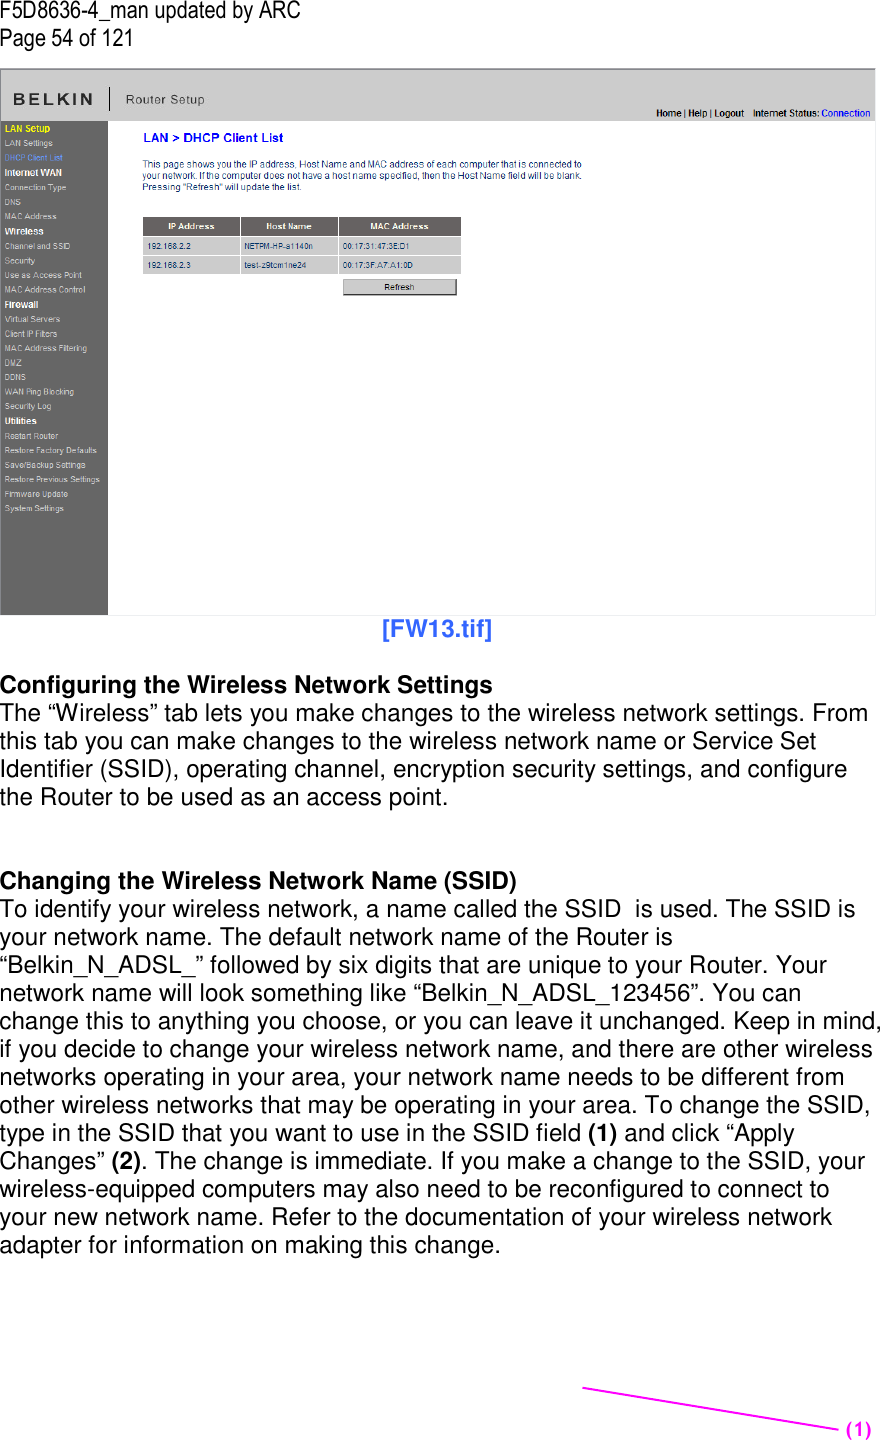 F5D8636-4_man updated by ARC Page 54 of 121  [FW13.tif]  Configuring the Wireless Network Settings The “Wireless” tab lets you make changes to the wireless network settings. From this tab you can make changes to the wireless network name or Service Set Identifier (SSID), operating channel, encryption security settings, and configure the Router to be used as an access point.   Changing the Wireless Network Name (SSID) To identify your wireless network, a name called the SSID  is used. The SSID is your network name. The default network name of the Router is “Belkin_N_ADSL_” followed by six digits that are unique to your Router. Your network name will look something like “Belkin_N_ADSL_123456”. You can change this to anything you choose, or you can leave it unchanged. Keep in mind, if you decide to change your wireless network name, and there are other wireless networks operating in your area, your network name needs to be different from other wireless networks that may be operating in your area. To change the SSID, type in the SSID that you want to use in the SSID field (1) and click “Apply Changes” (2). The change is immediate. If you make a change to the SSID, your wireless-equipped computers may also need to be reconfigured to connect to your new network name. Refer to the documentation of your wireless network adapter for information on making this change.  (1)  